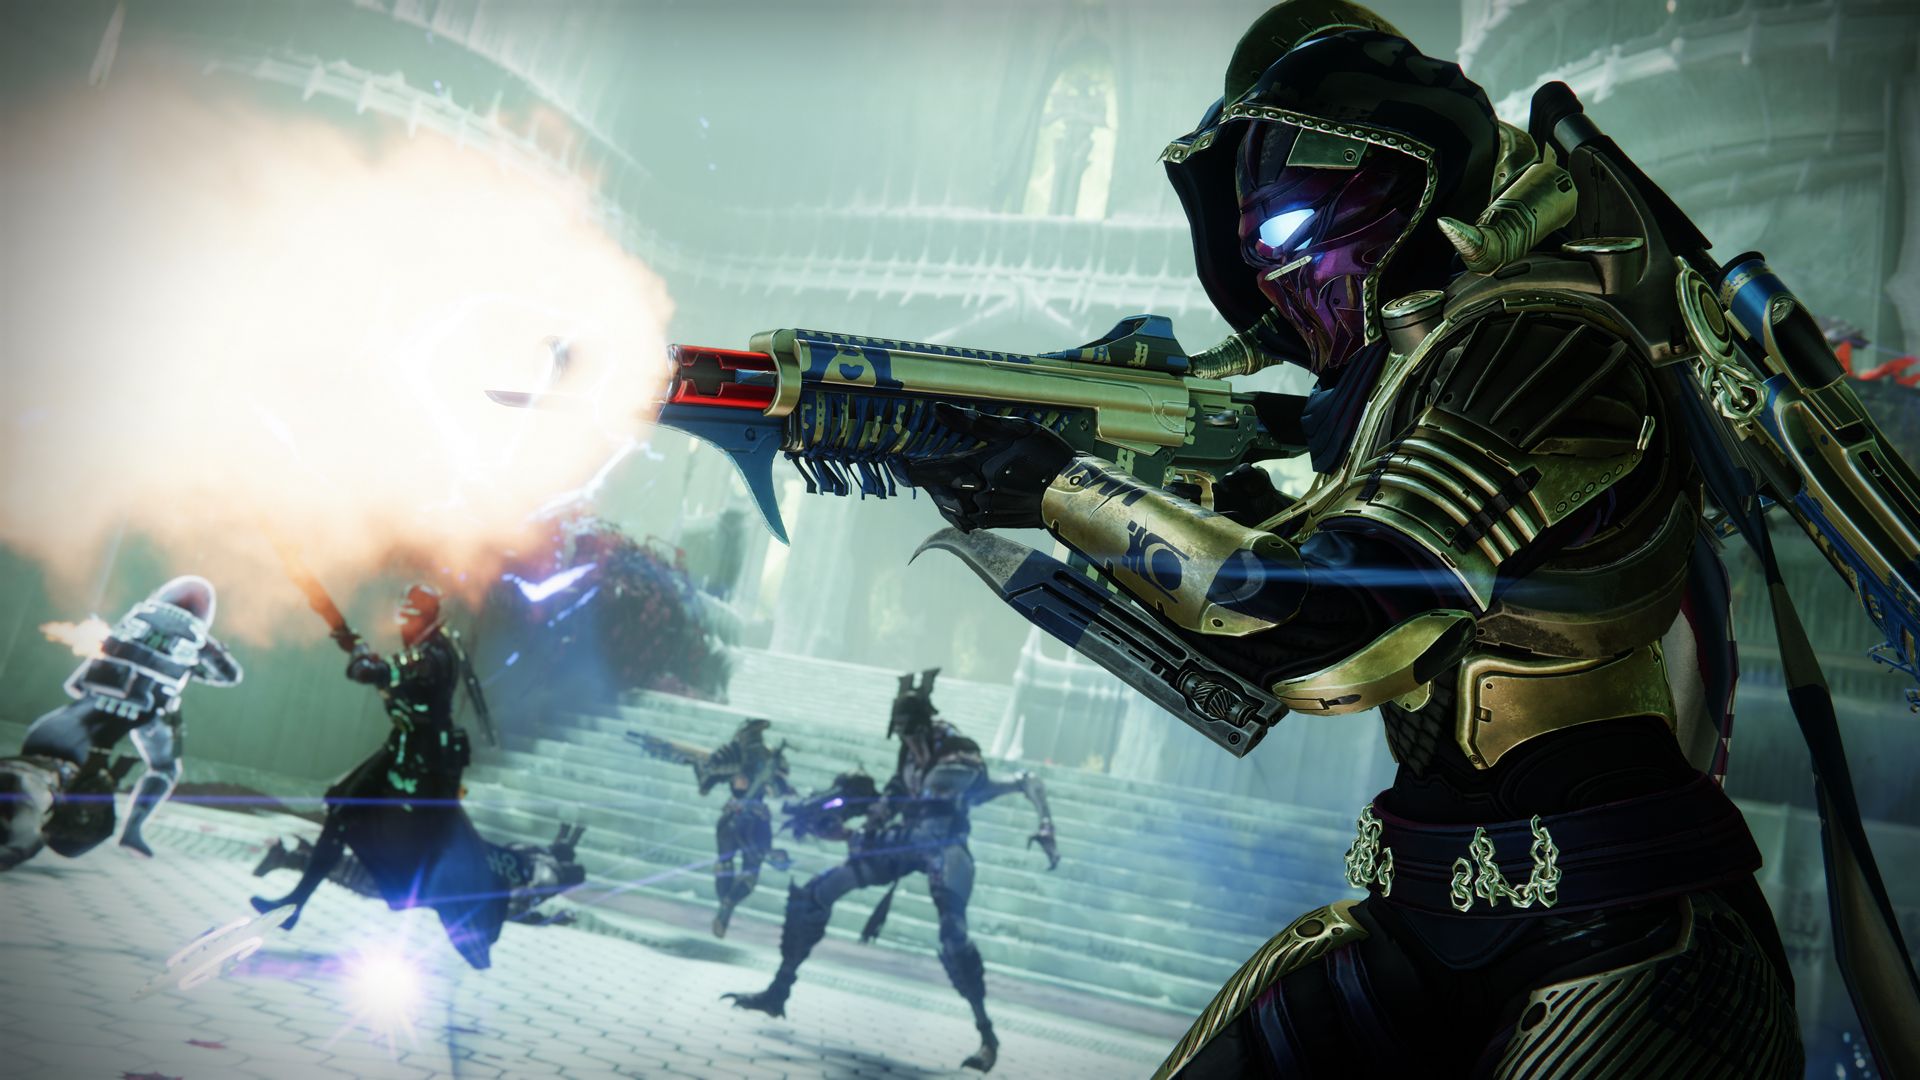 Best Xbox FPS games: A soldier shoots a rifle in Destiny 2